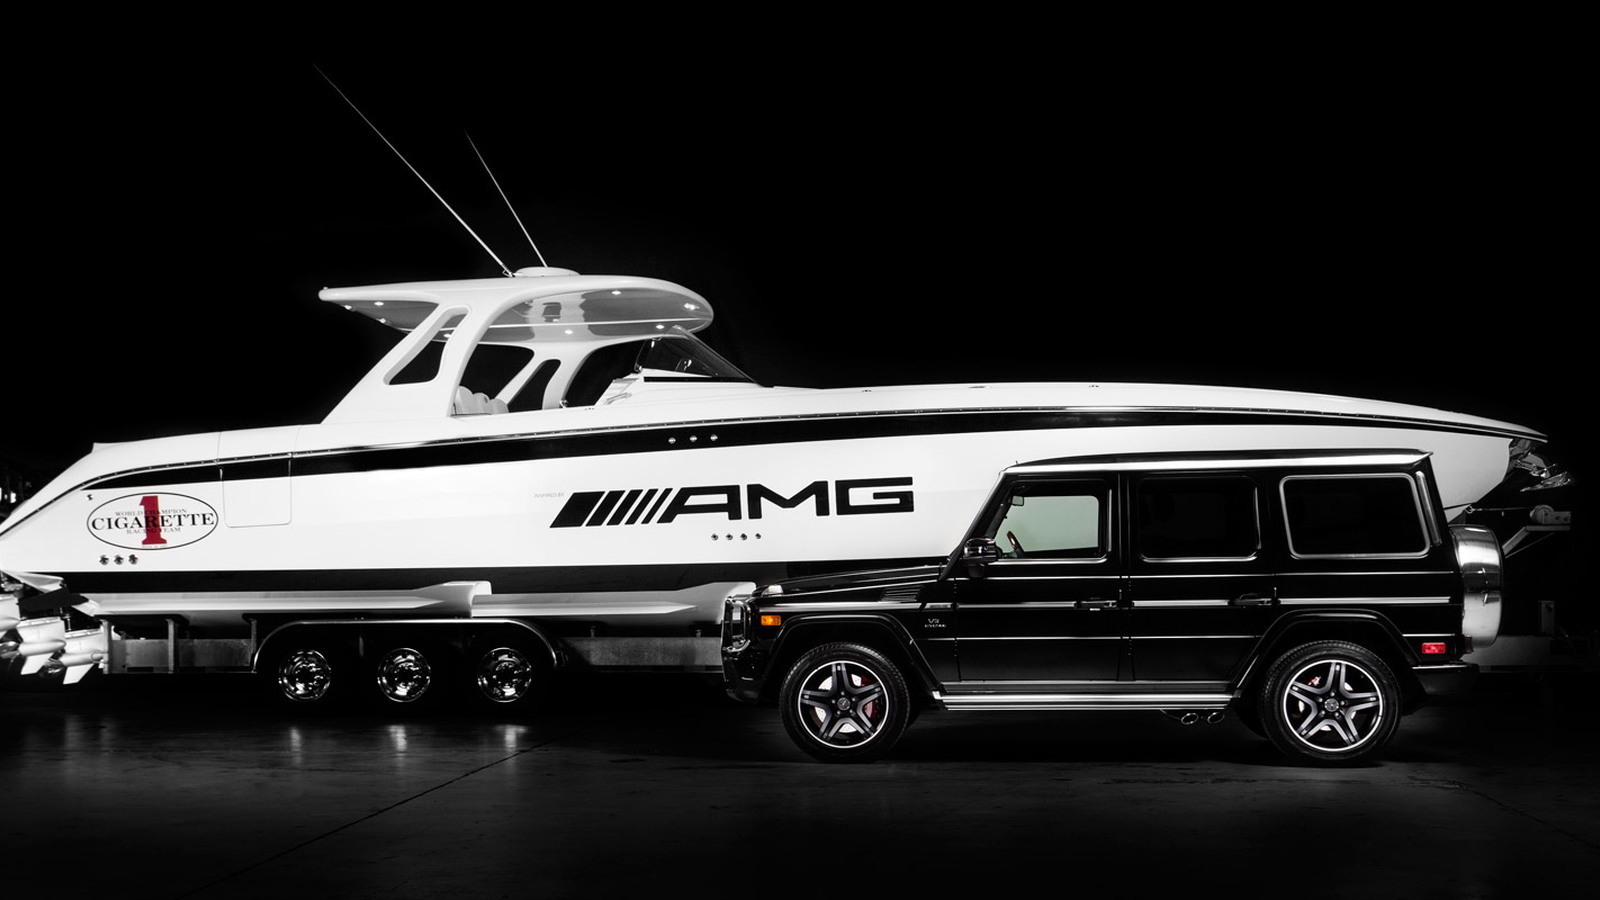 Cigarette Racing Huntress is a 42-foot boat whose design is inspired by the Mercedes-Benz G63 AMG